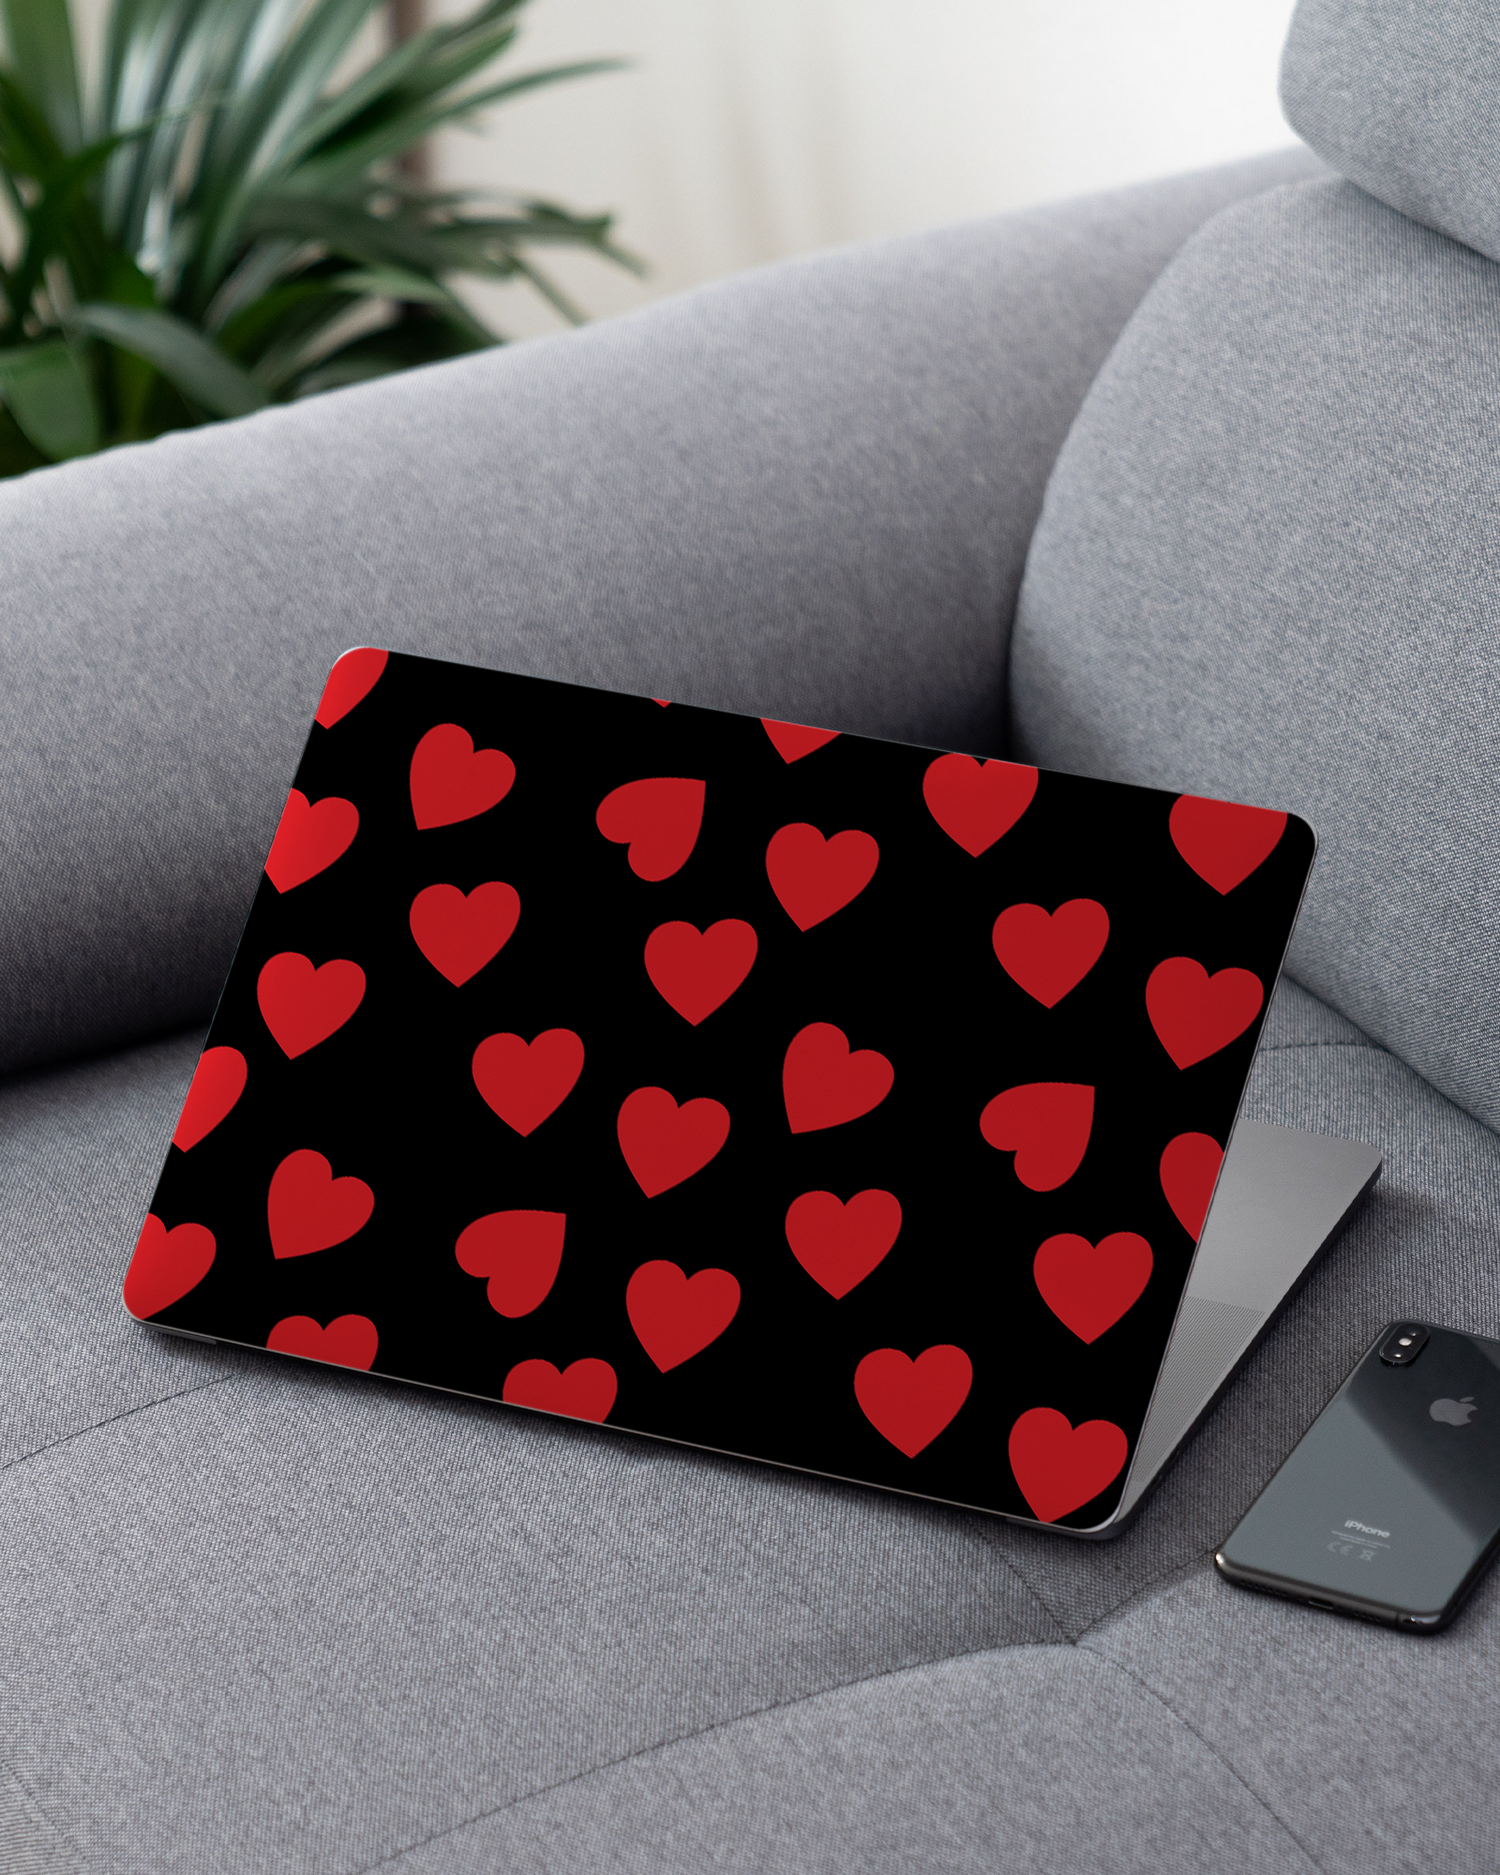 Repeating Hearts Laptop Skin for 13 inch Apple MacBooks on a couch